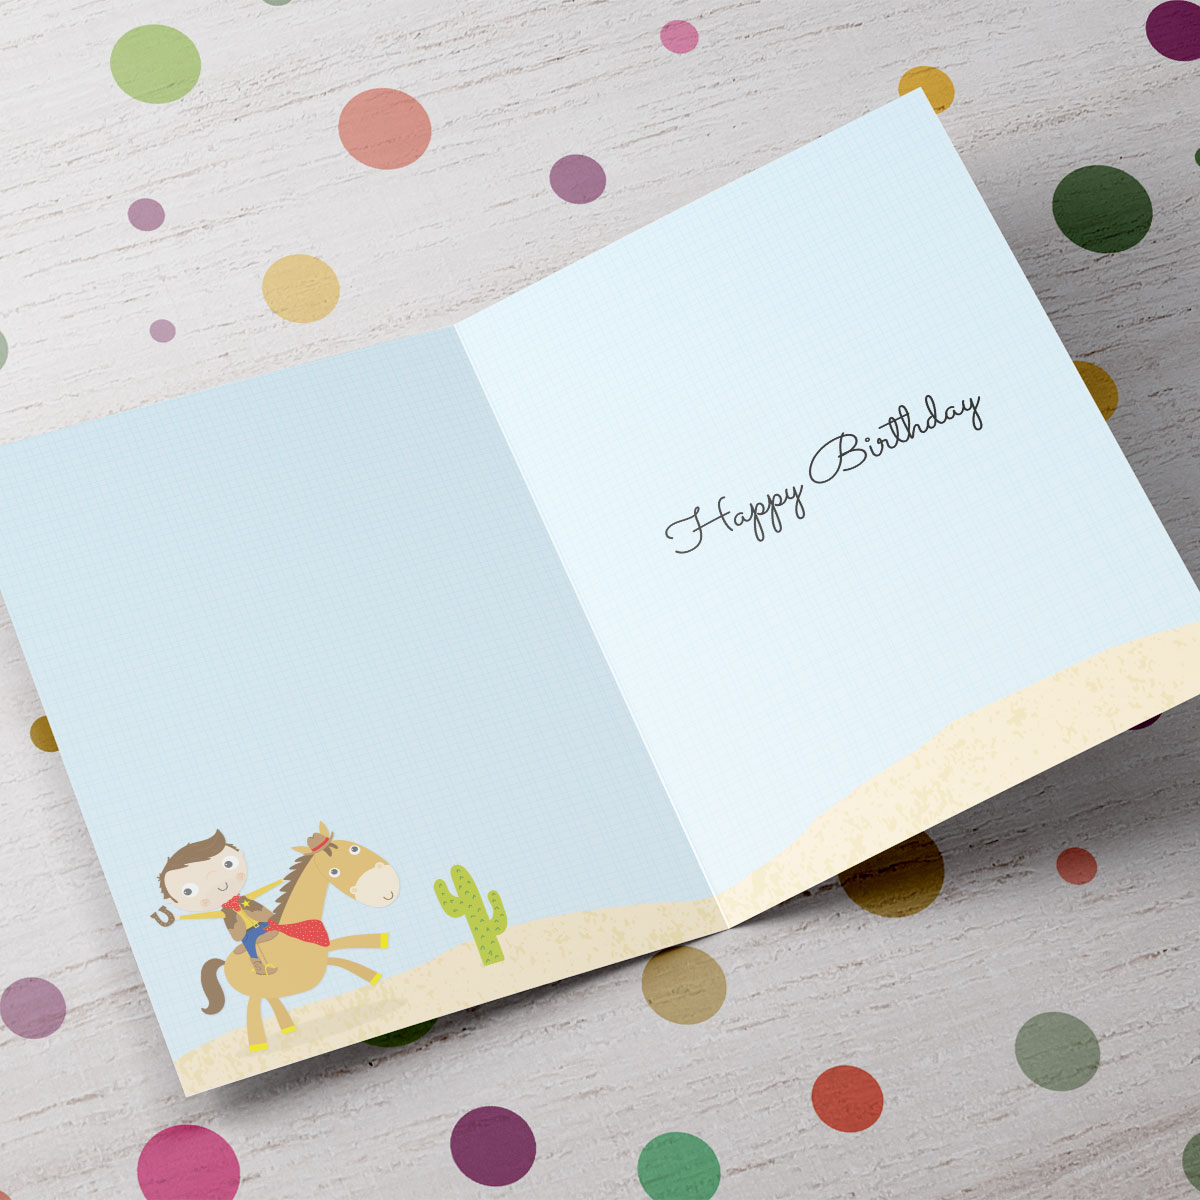 Personalised Any Age Birthday Card - Cowboys & Indians